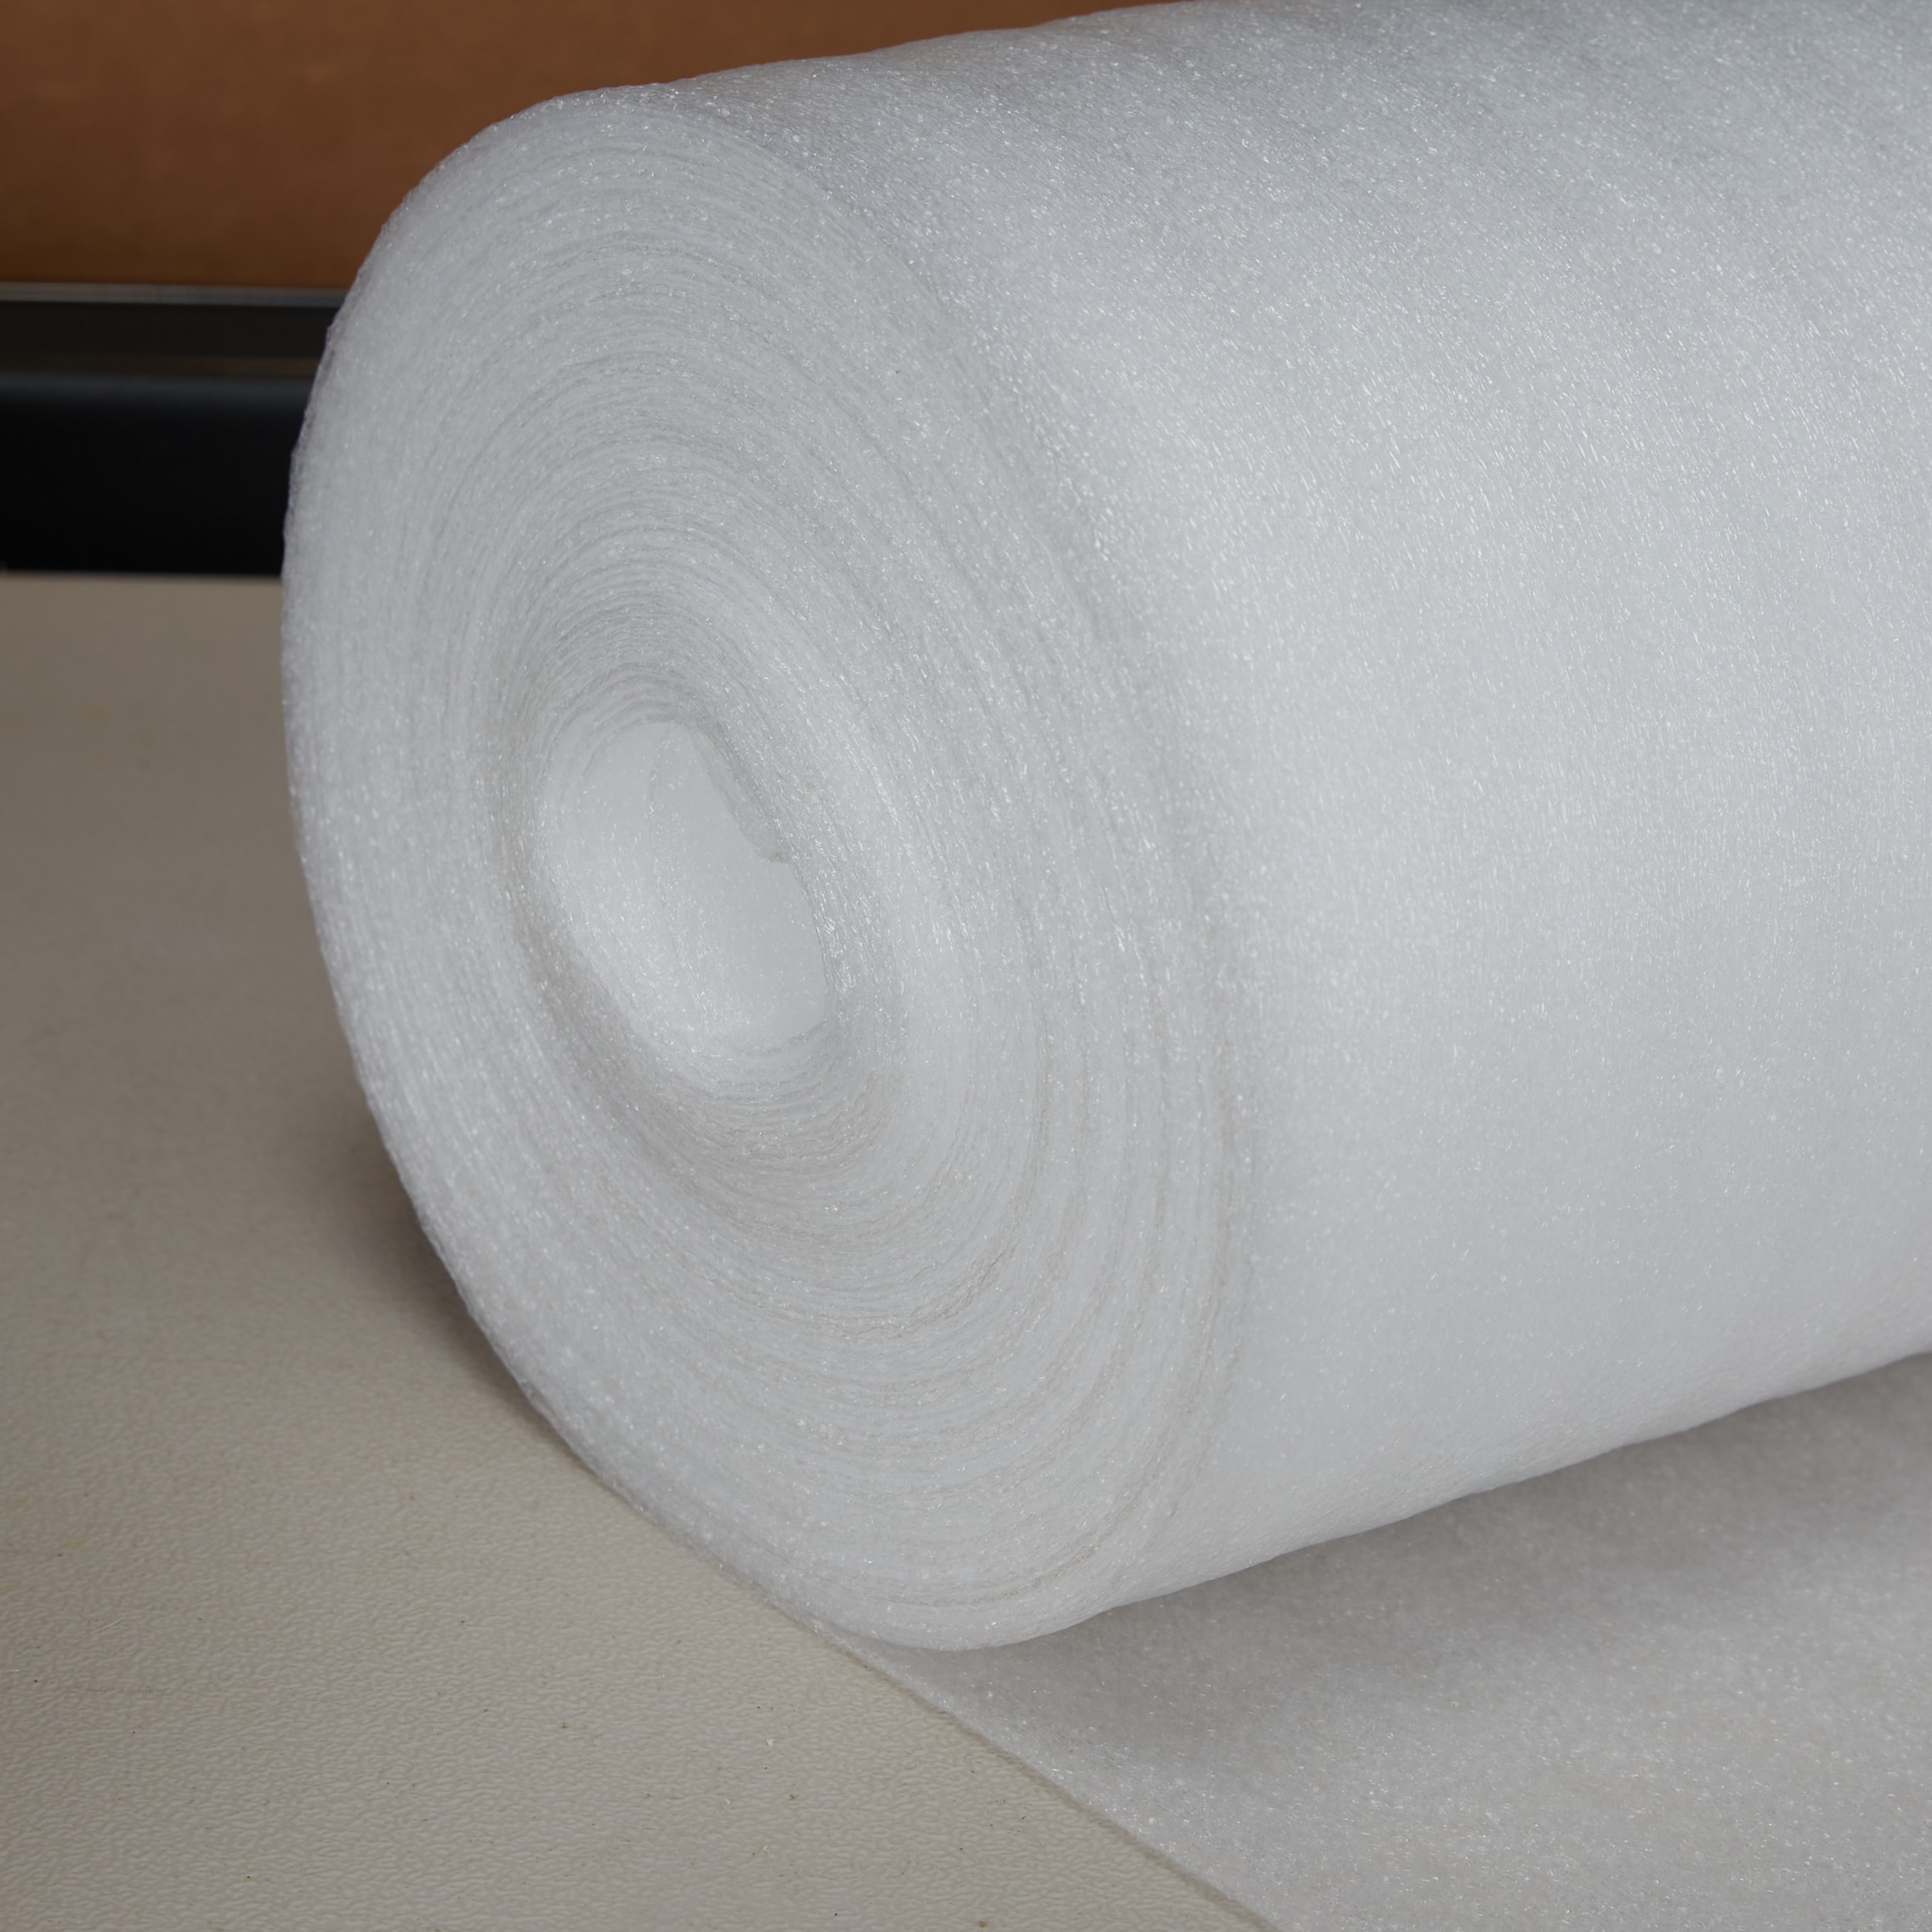 Recycled Packing Shipping Foam, SIX Long Strips Very Firm 4.75 x 49, White